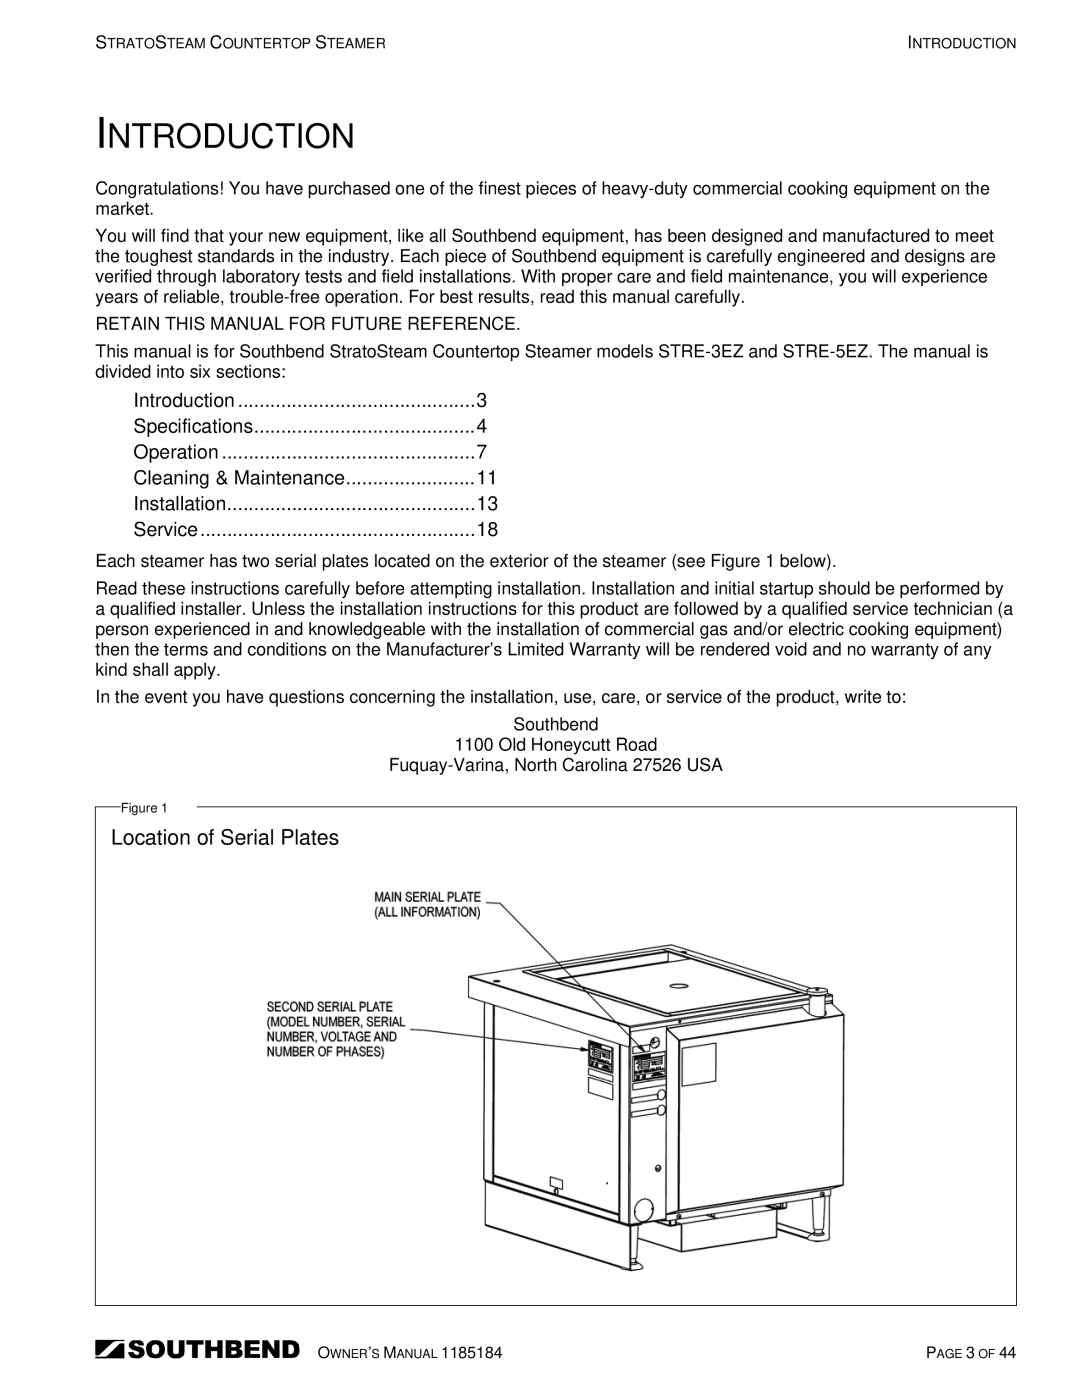 Southbend STRE-5EZ, STRE-3EZ owner manual Introduction, Location of Serial Plates 